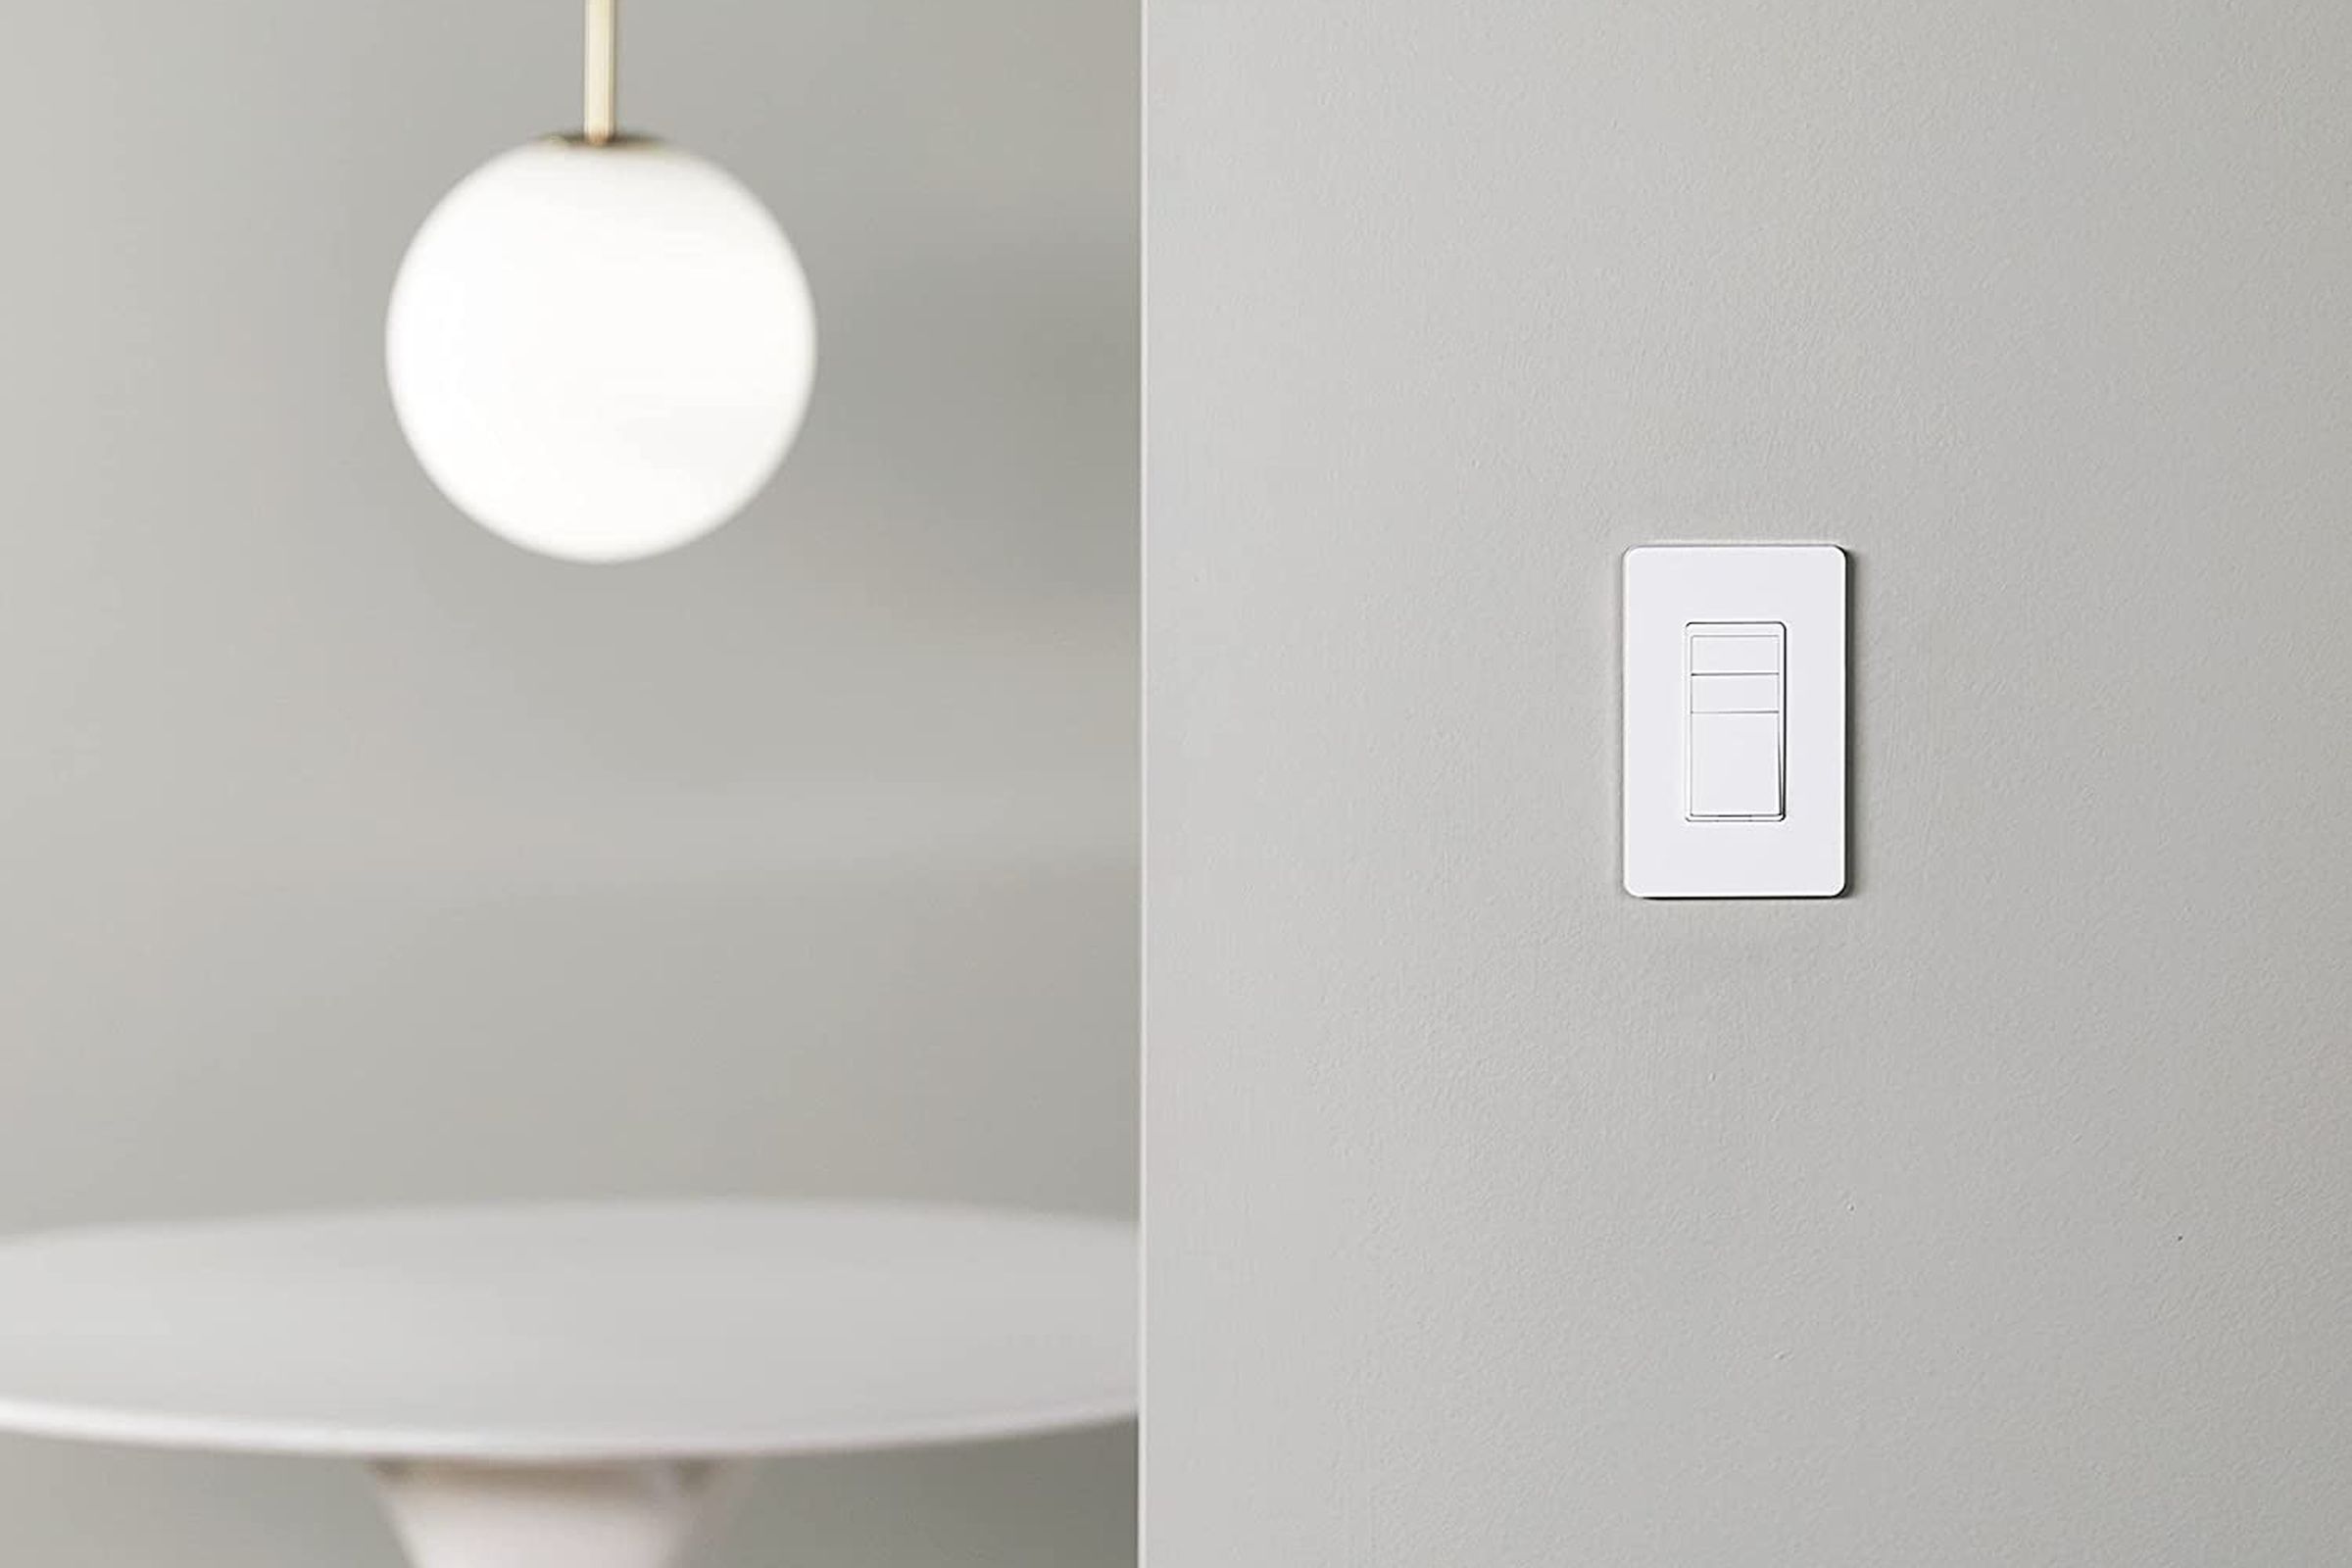 Amazon Basics new smart switches add simple smart control to existing lighting.